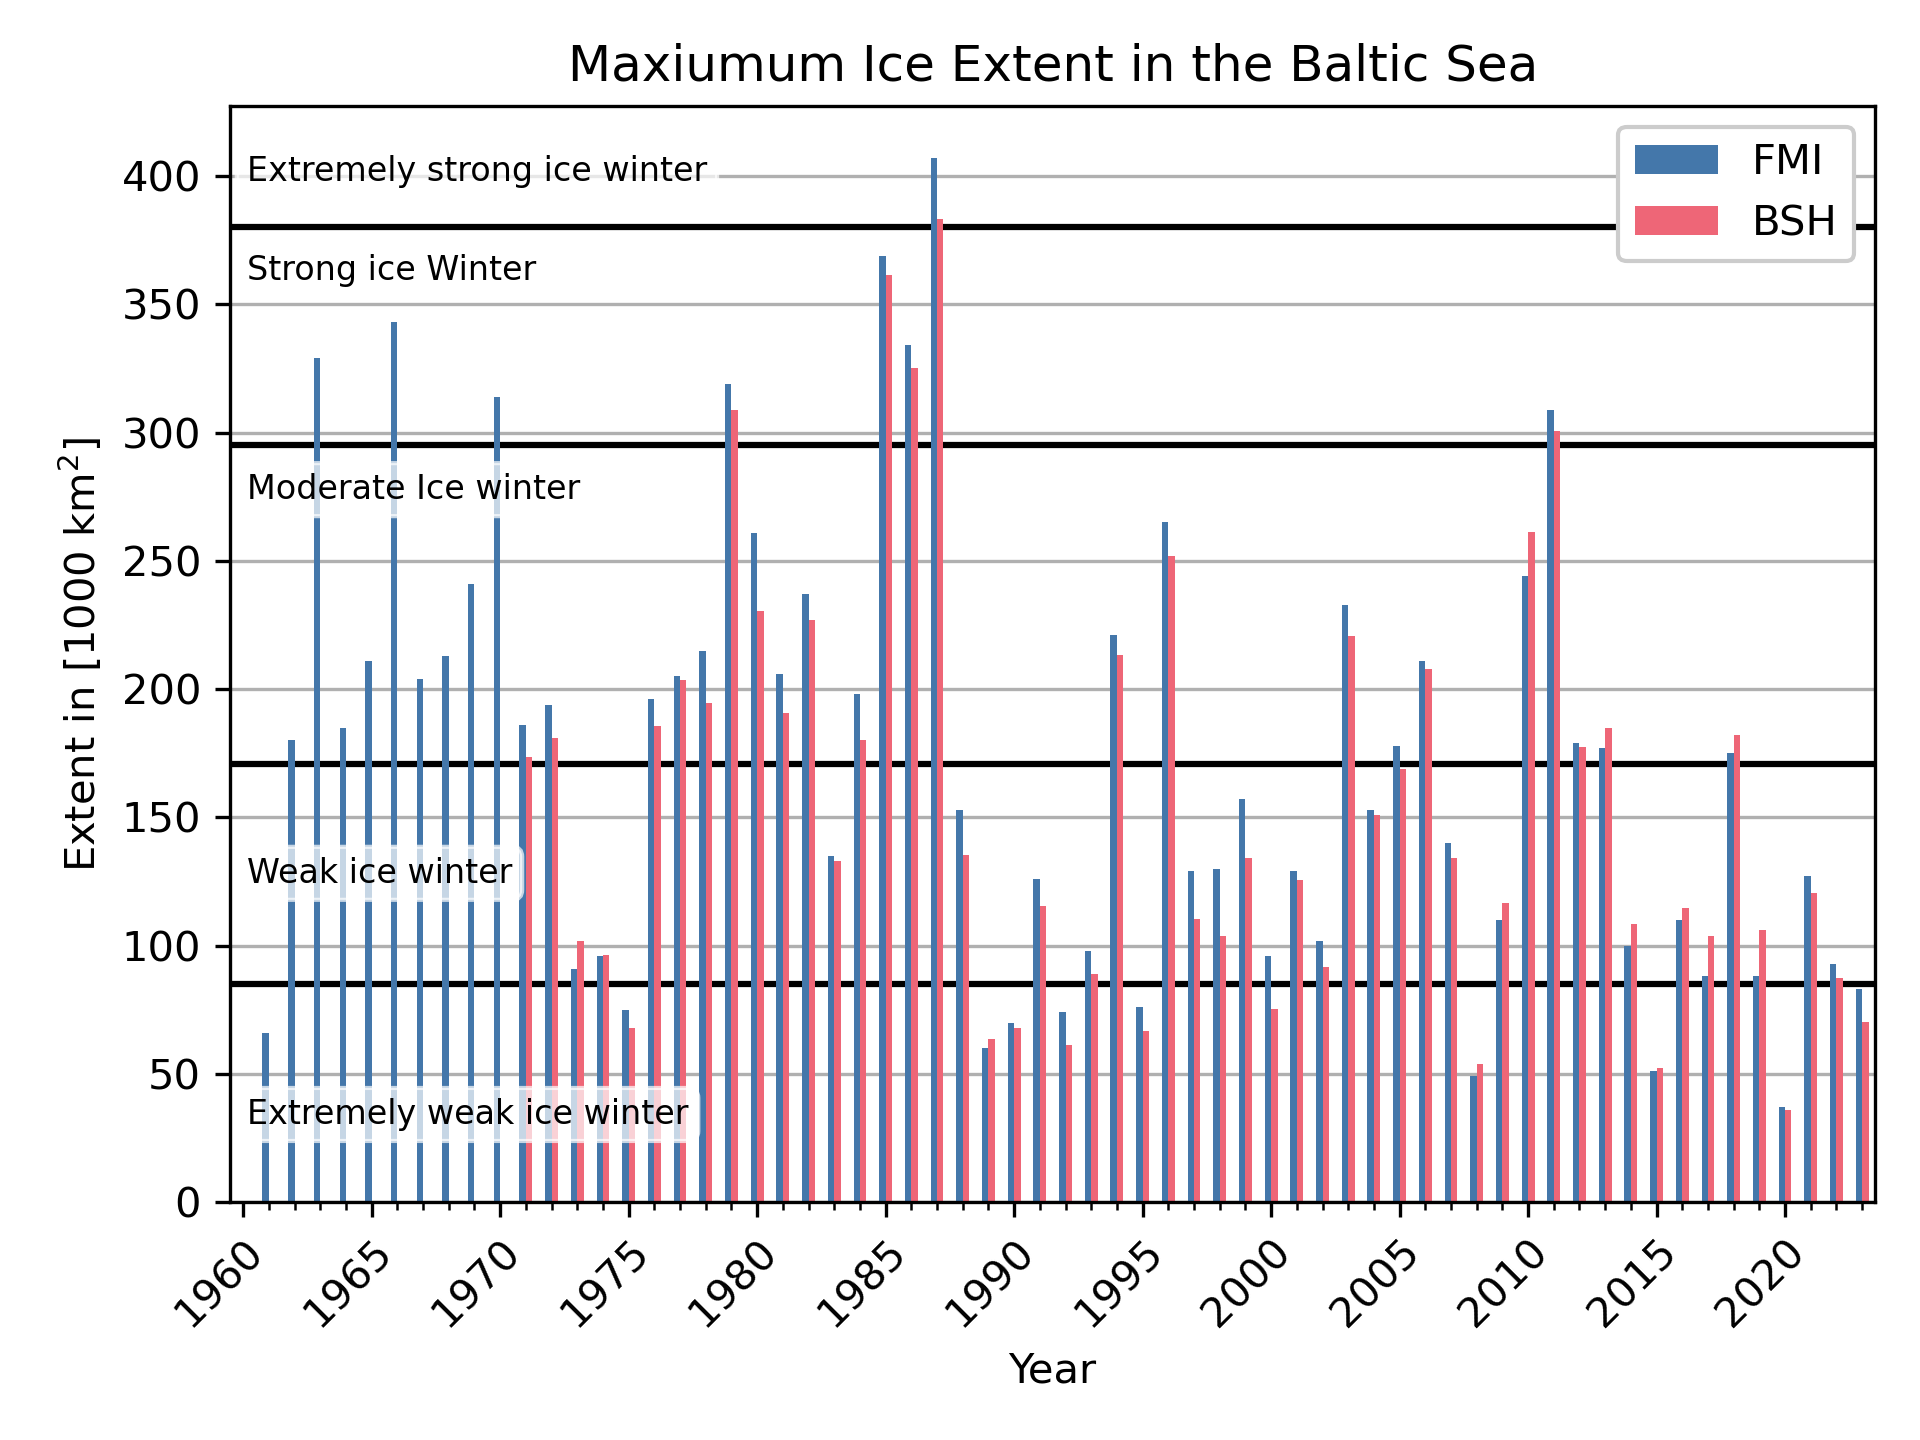 Time series of maximum ice extent from FMI and BSH since 1960.